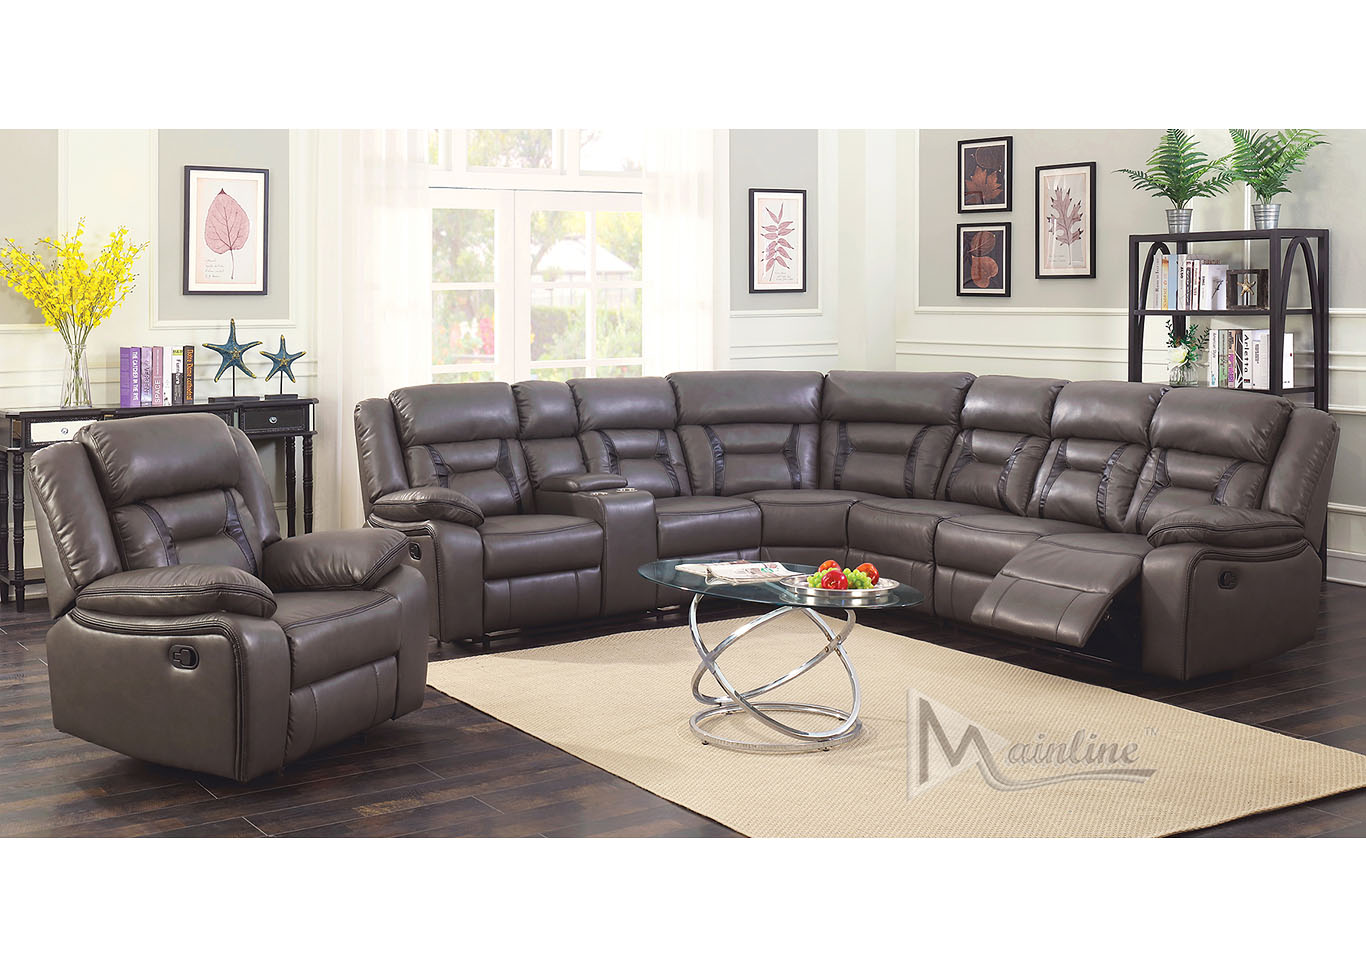 2-Piece Cha-Cha Motion Sectional,Mainline